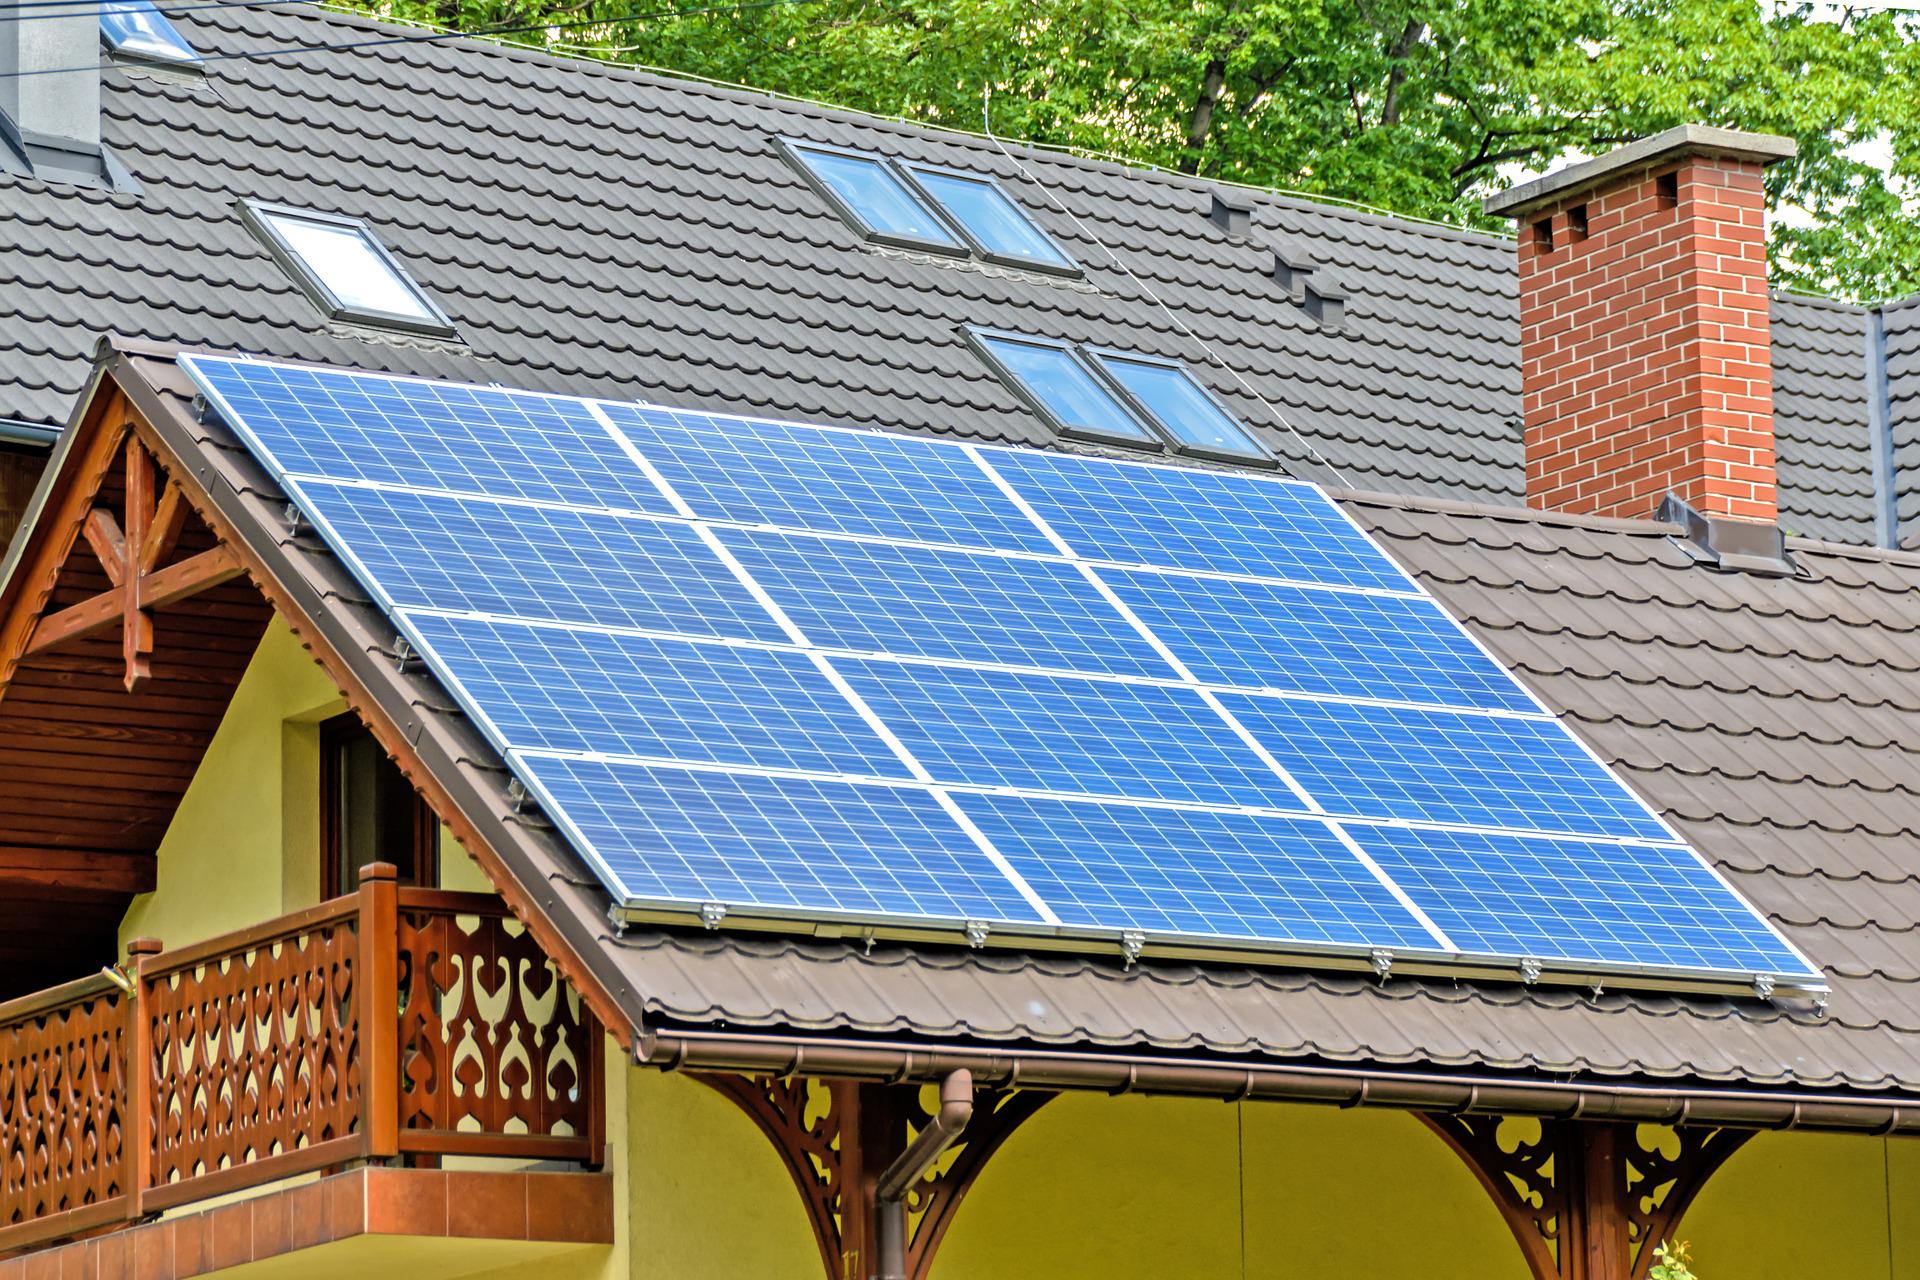 Subsidy for barnevelders who want to invest in home battery to store solar energy